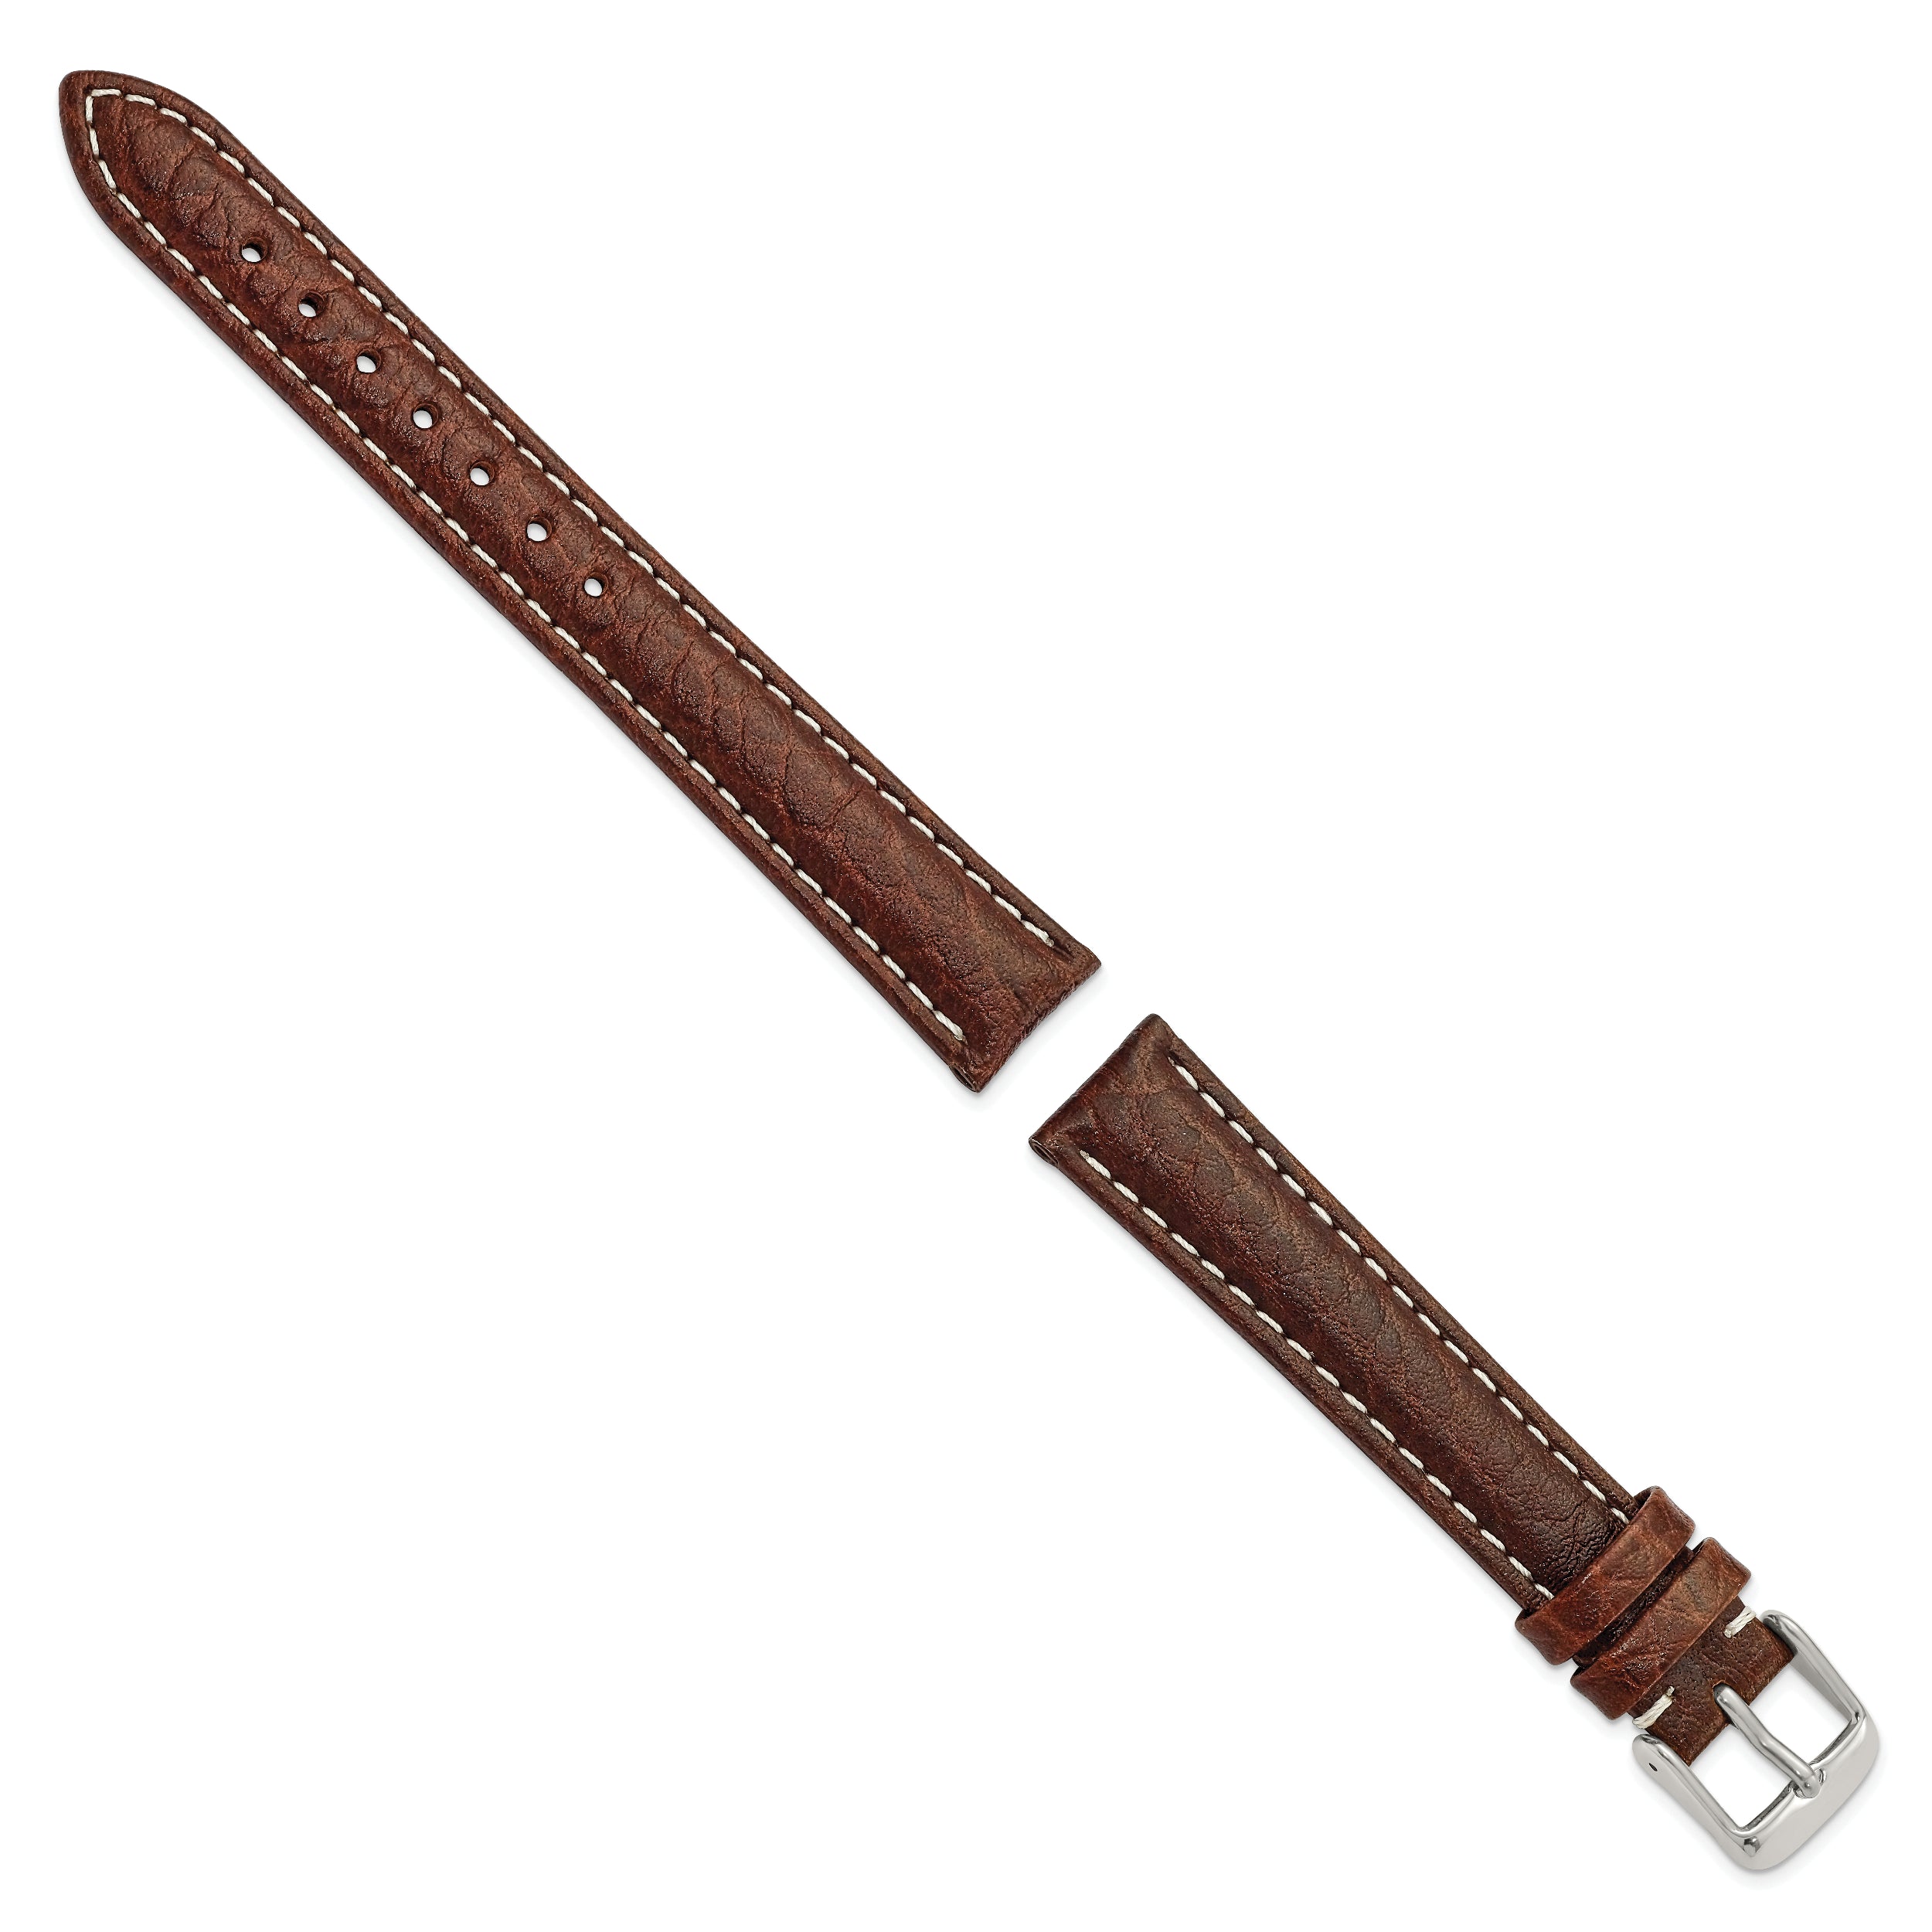 12mm Dark Brown Sport Leather with White Stitching and Silver-tone Buckle 6.75 inch Watch Band